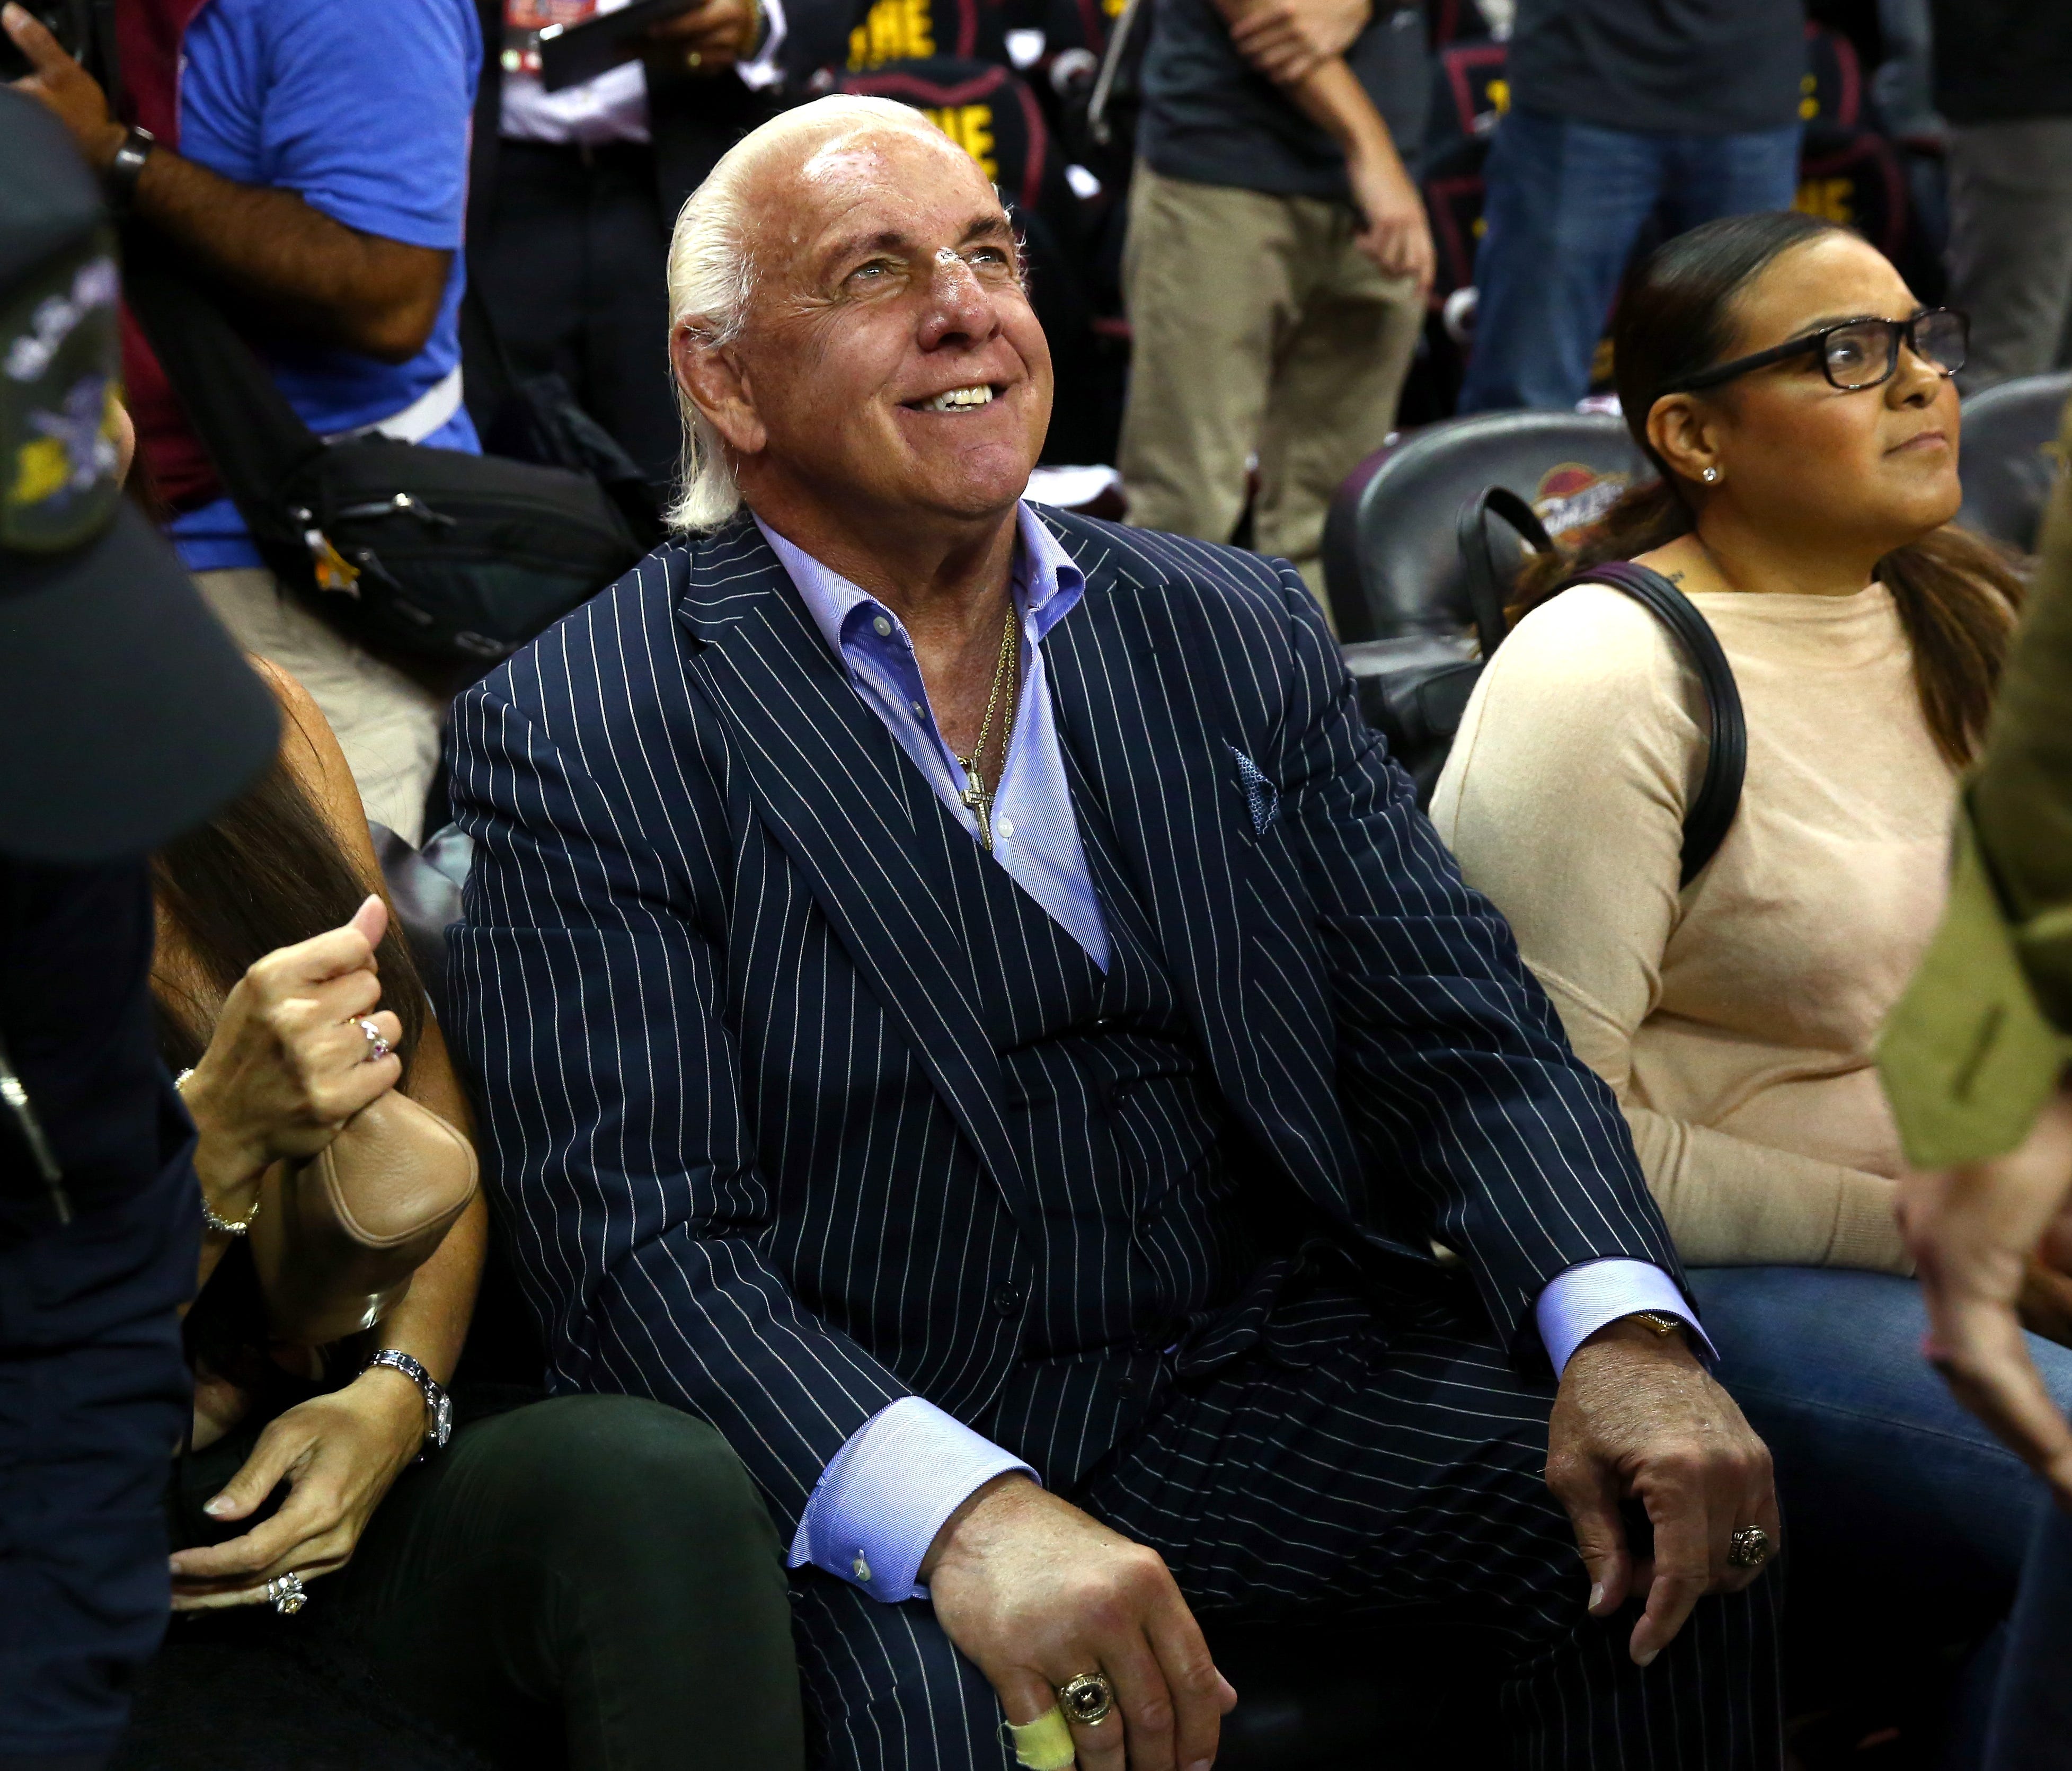 Ric Flair is in the hospital, facing 'some tough medical issues.'